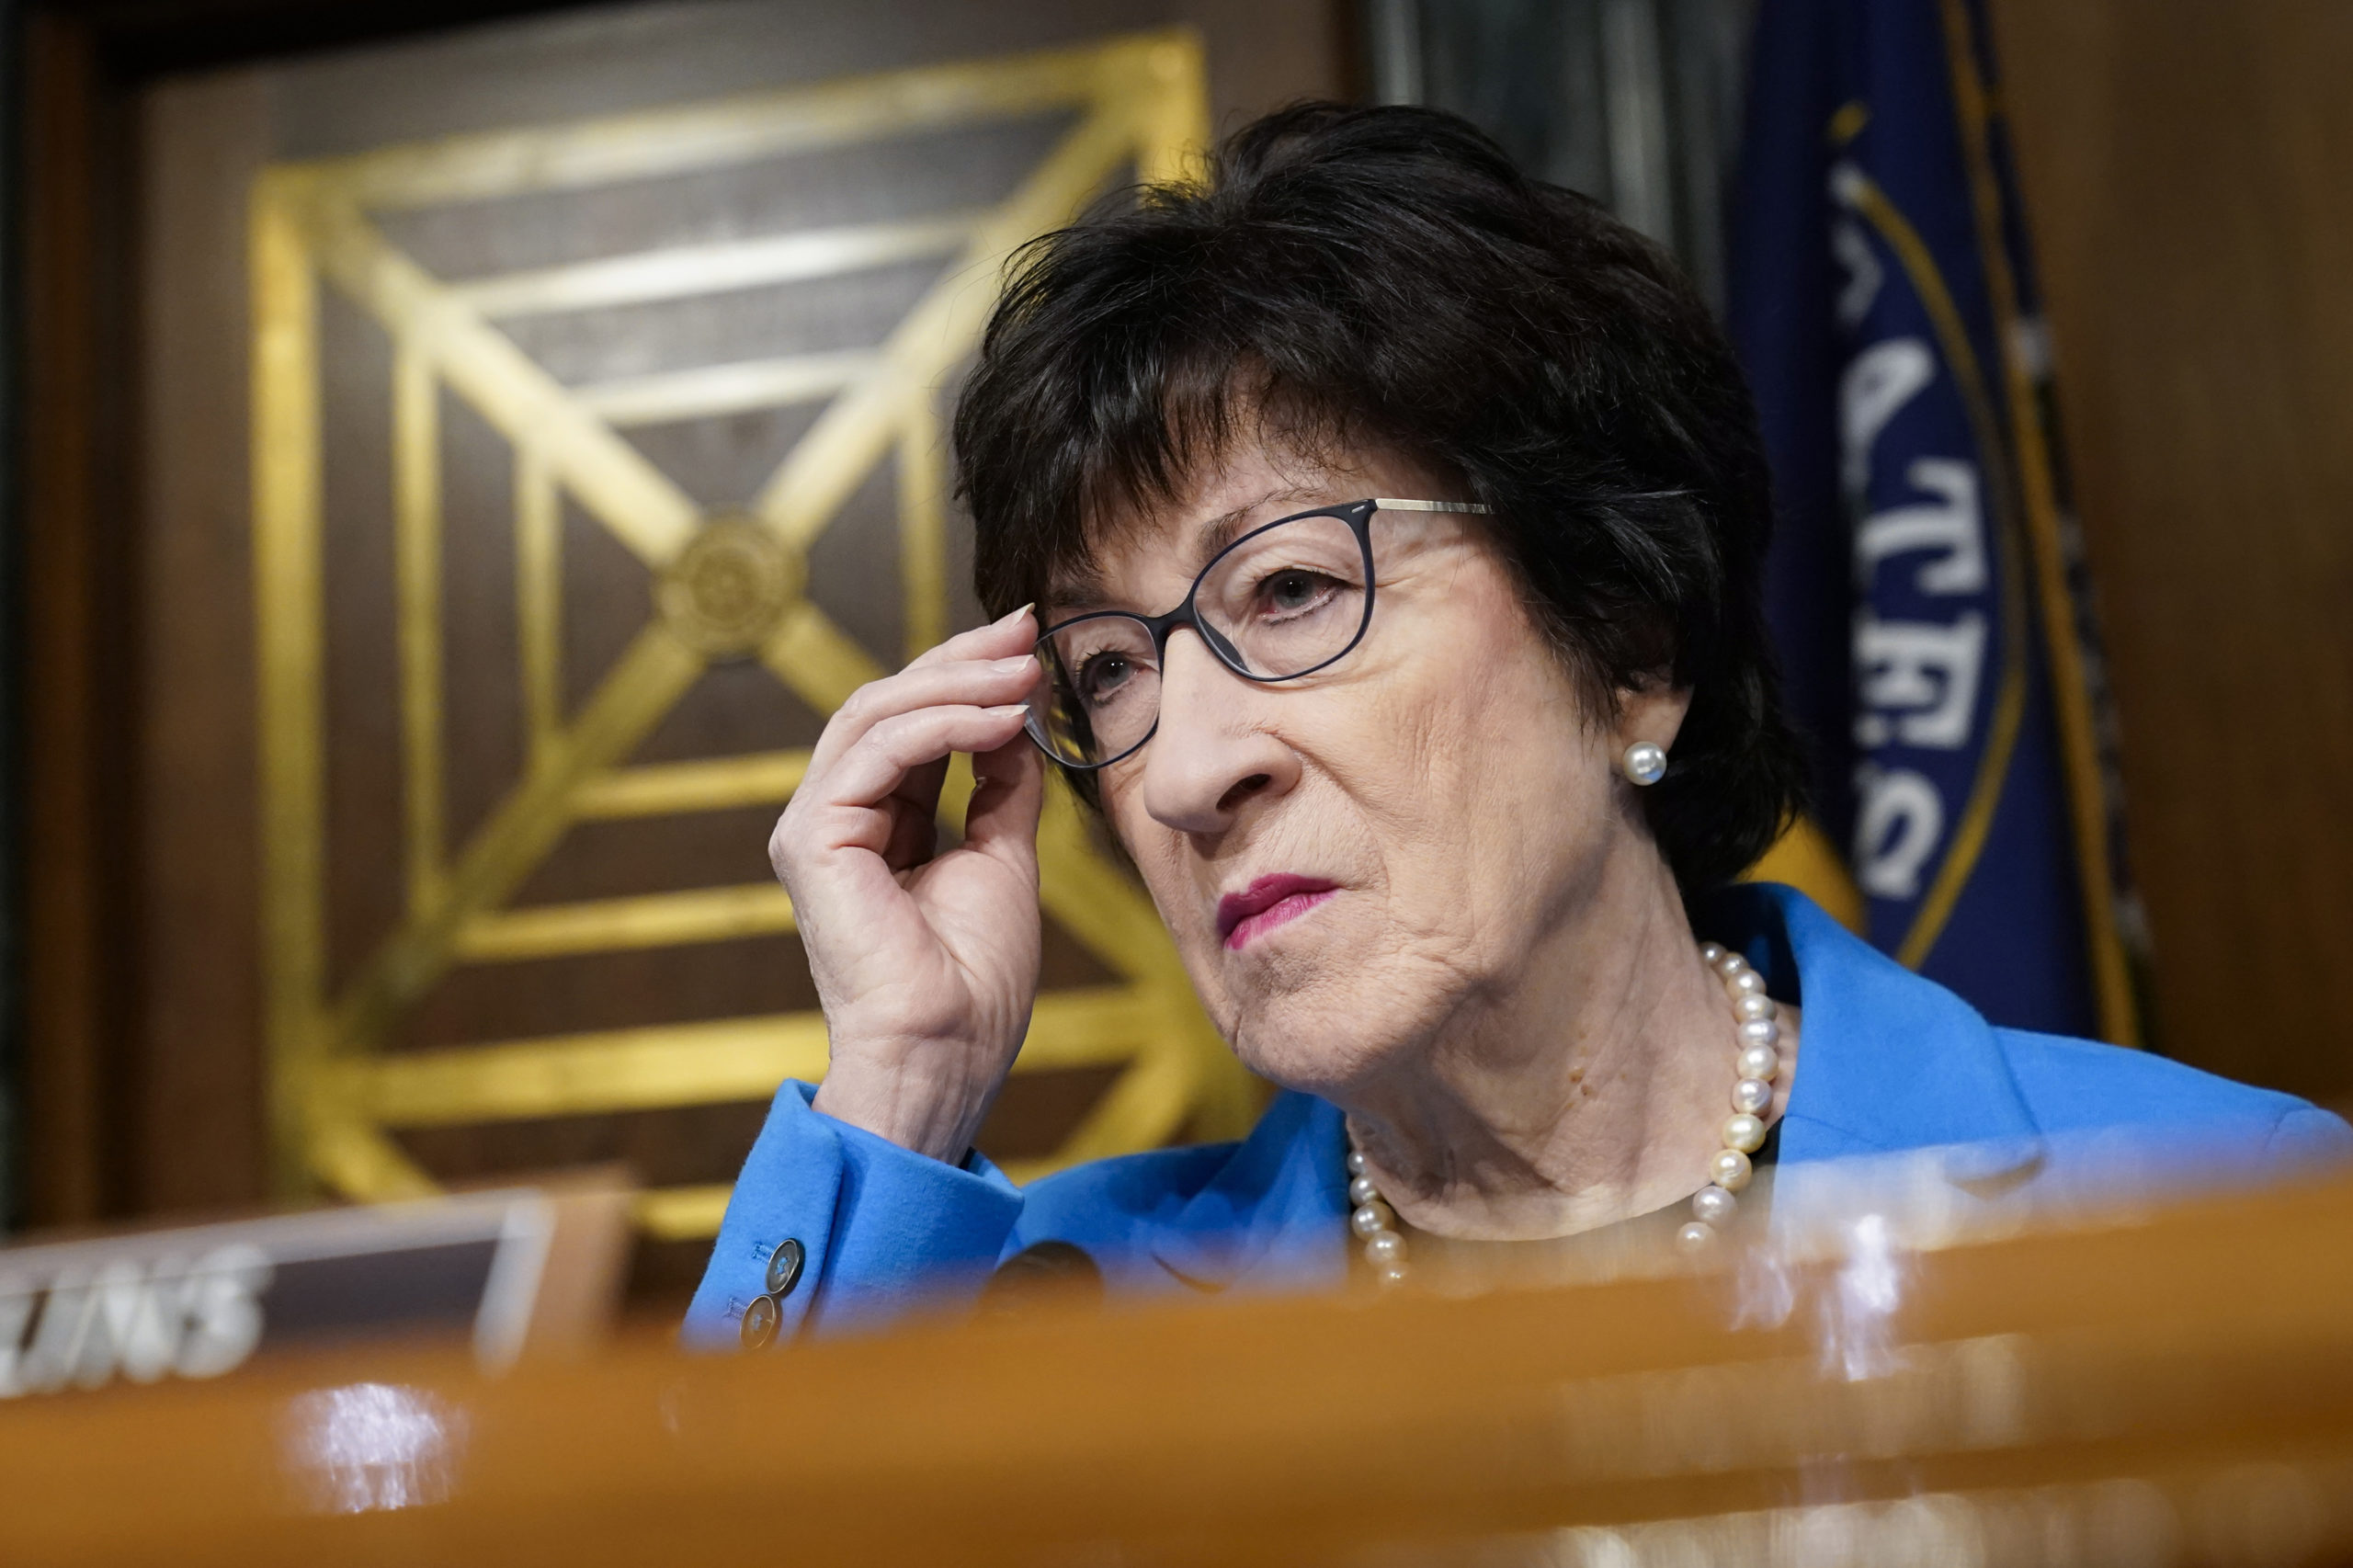 Maine GOP Sen. Susan Collins told reporters Friday that she intends to write in former South Carolina Gov. Nikki Haley's name on the ballot in November.